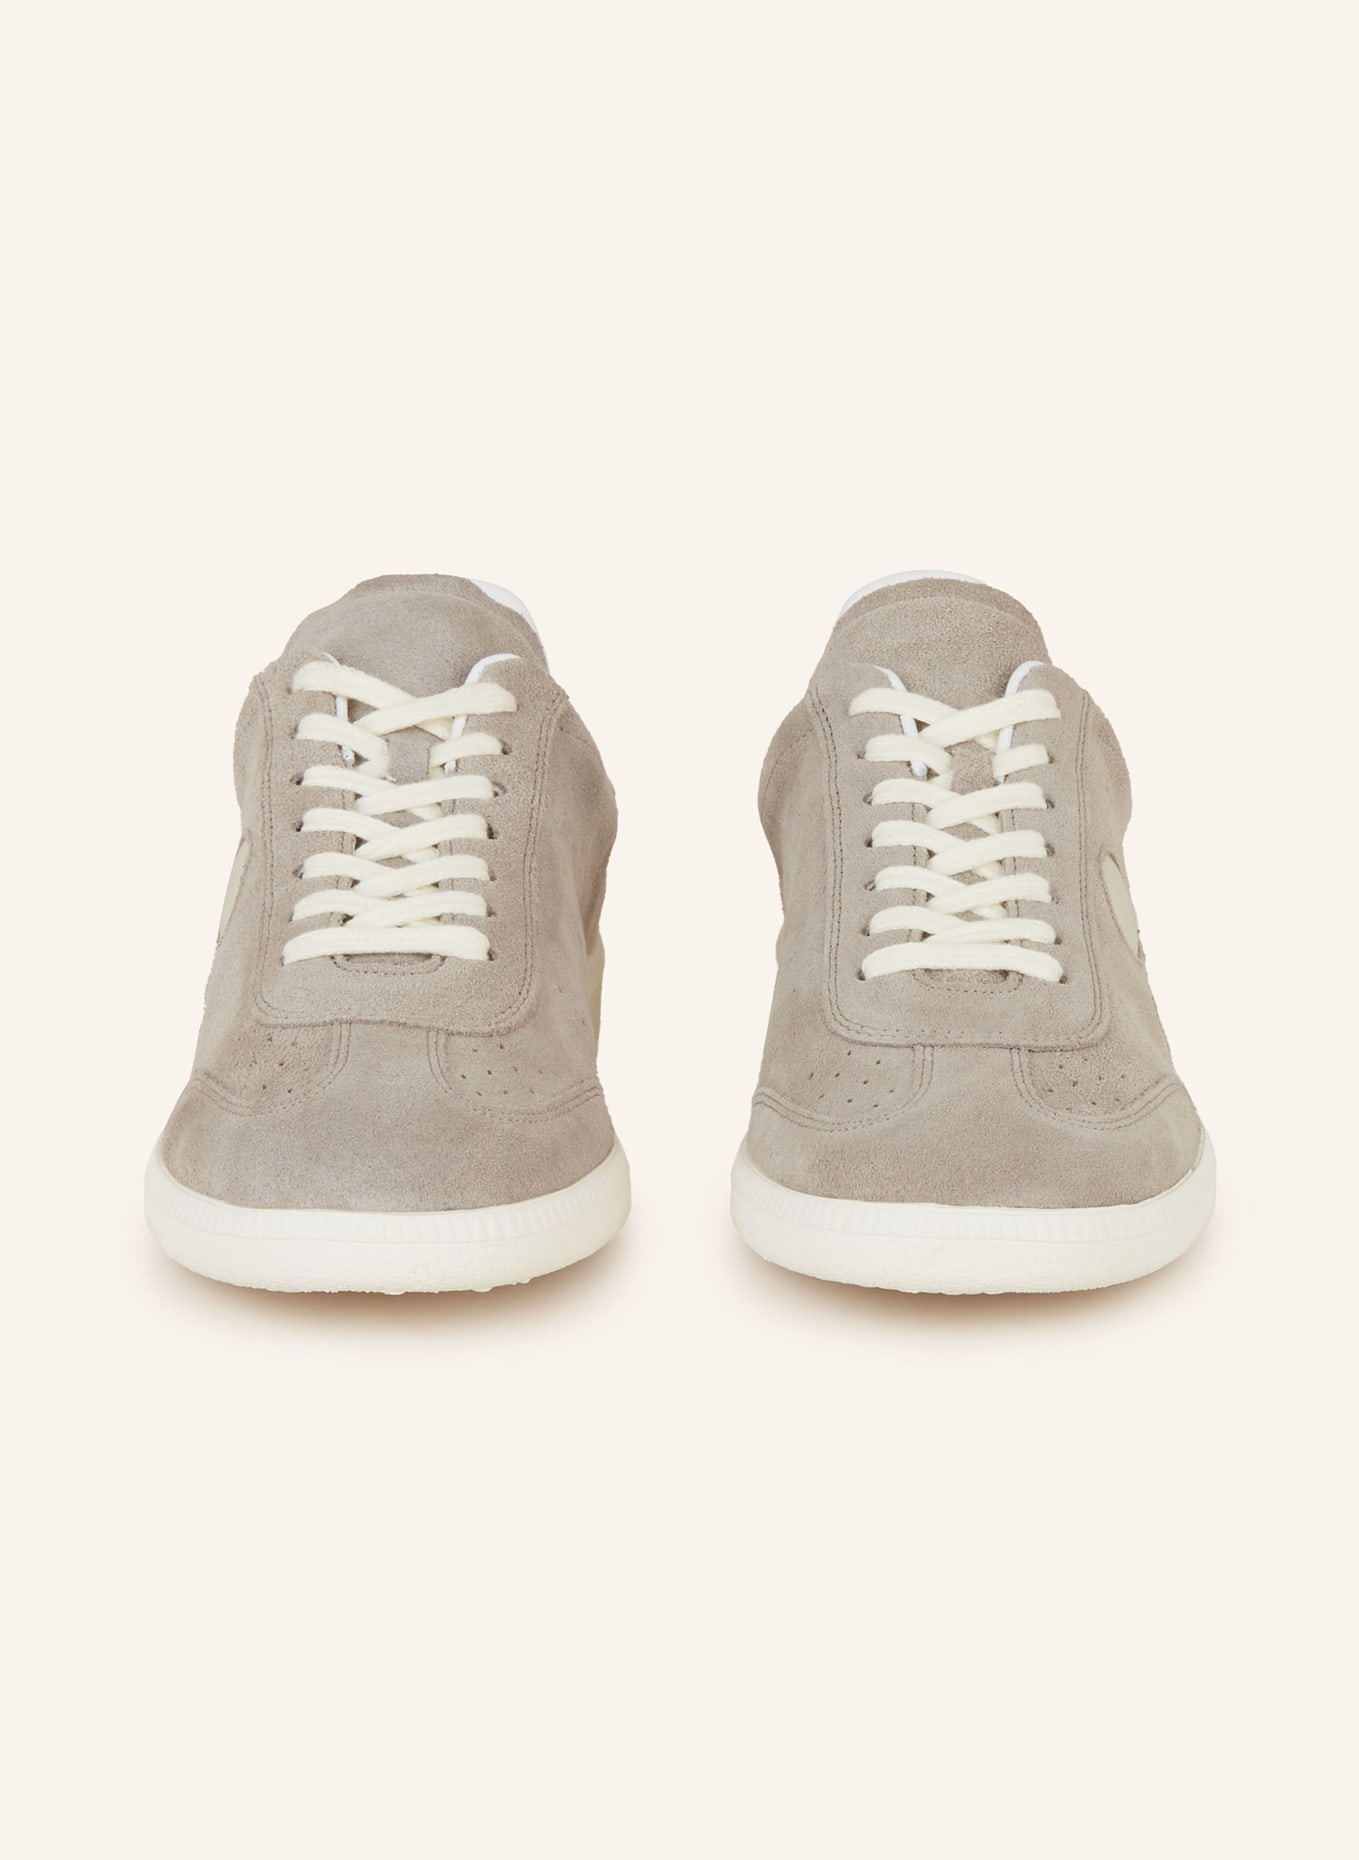 ISABEL MARANT Sneaker BRYCE, Farbe: TAUPE (Bild 3)